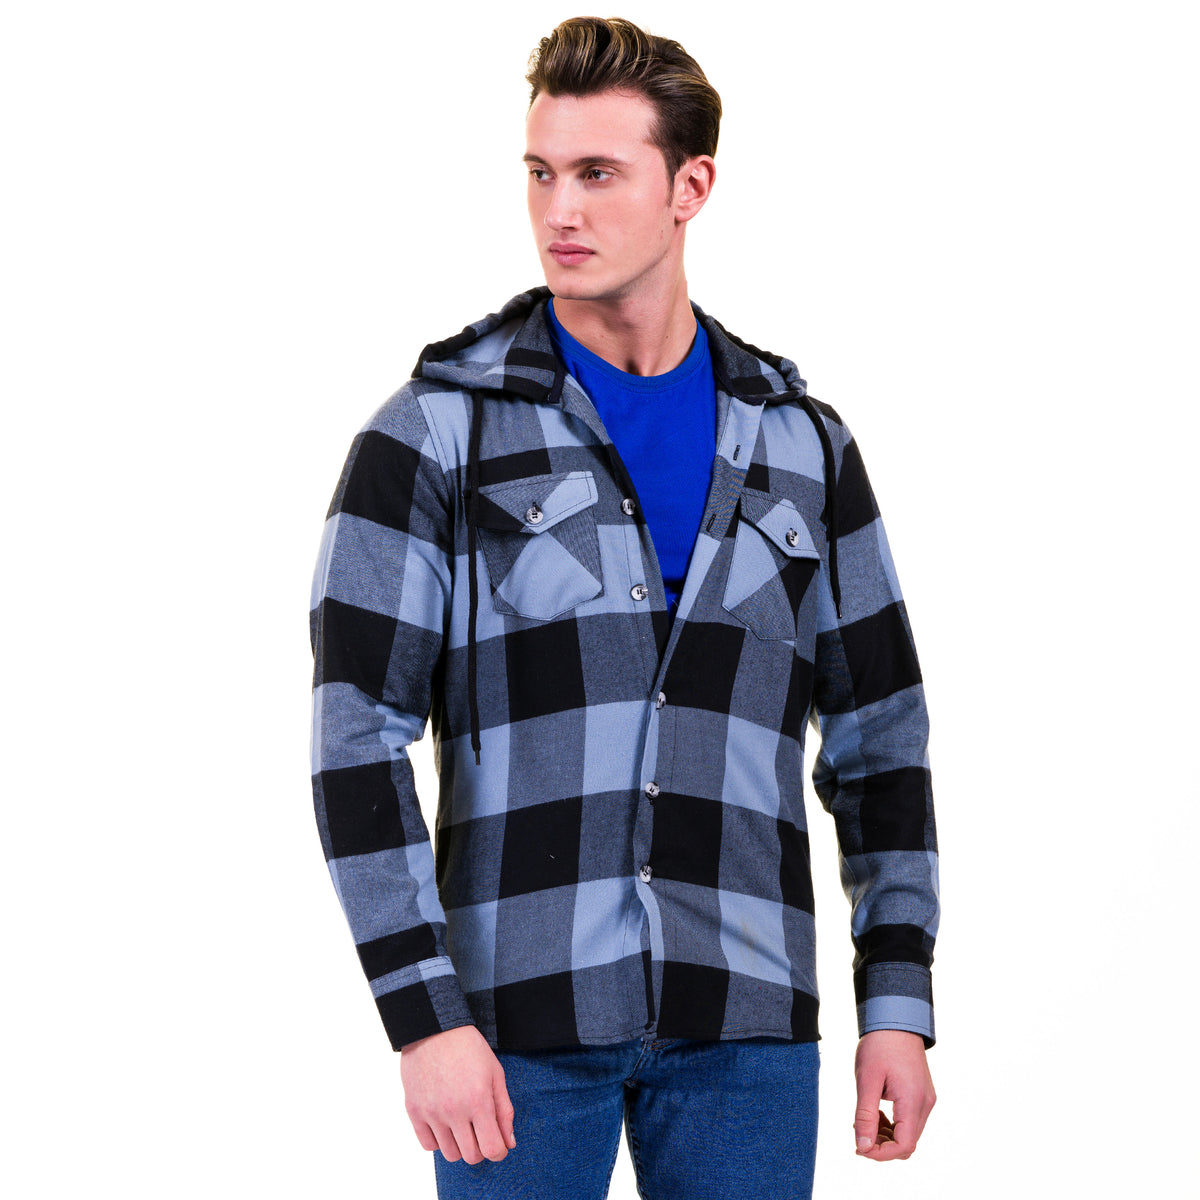 Blue Black Check European Wool Luxury Zippered With Hoodie Sweater Jacket Warm Winter Tailor Fit